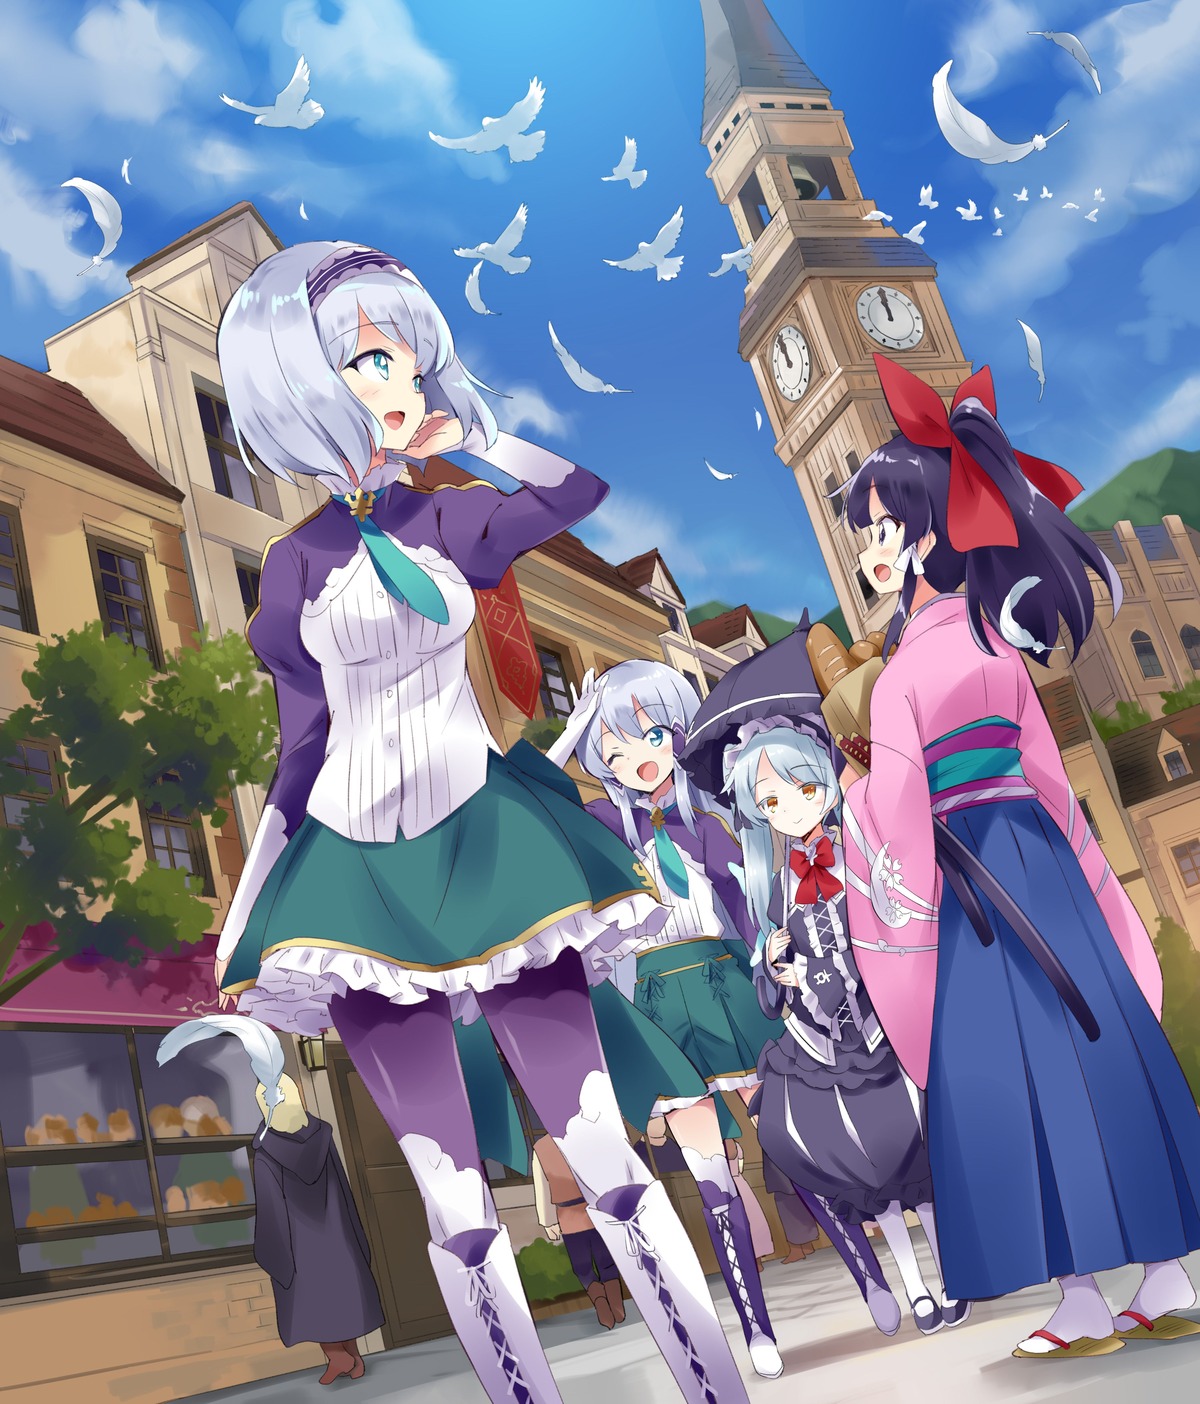 ISEKAI WA SMARTPHONE TO - Anime Recommendations 4 You